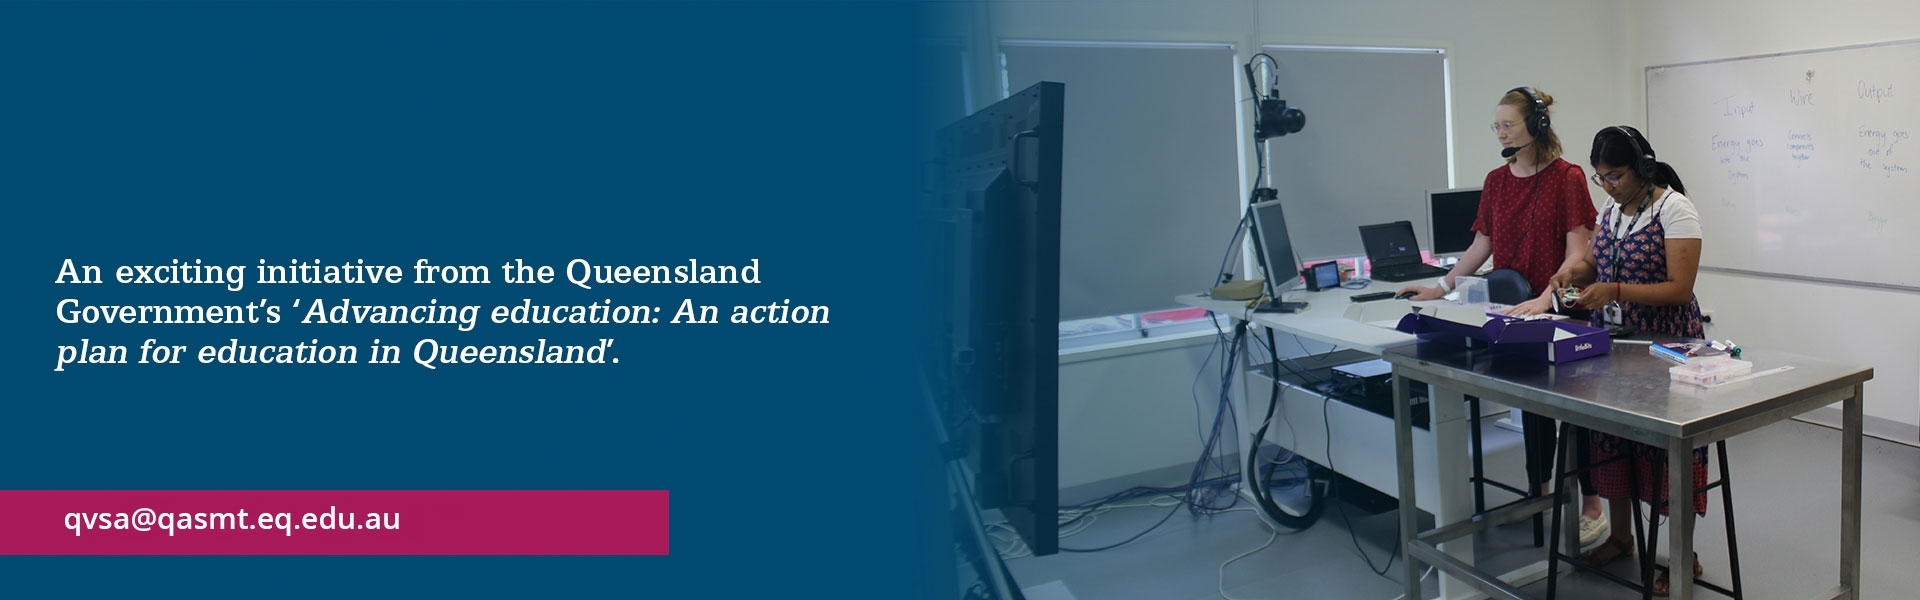 An exciting initiative from the Queensland Government's Advancing education: An action plan for education in Queensland.